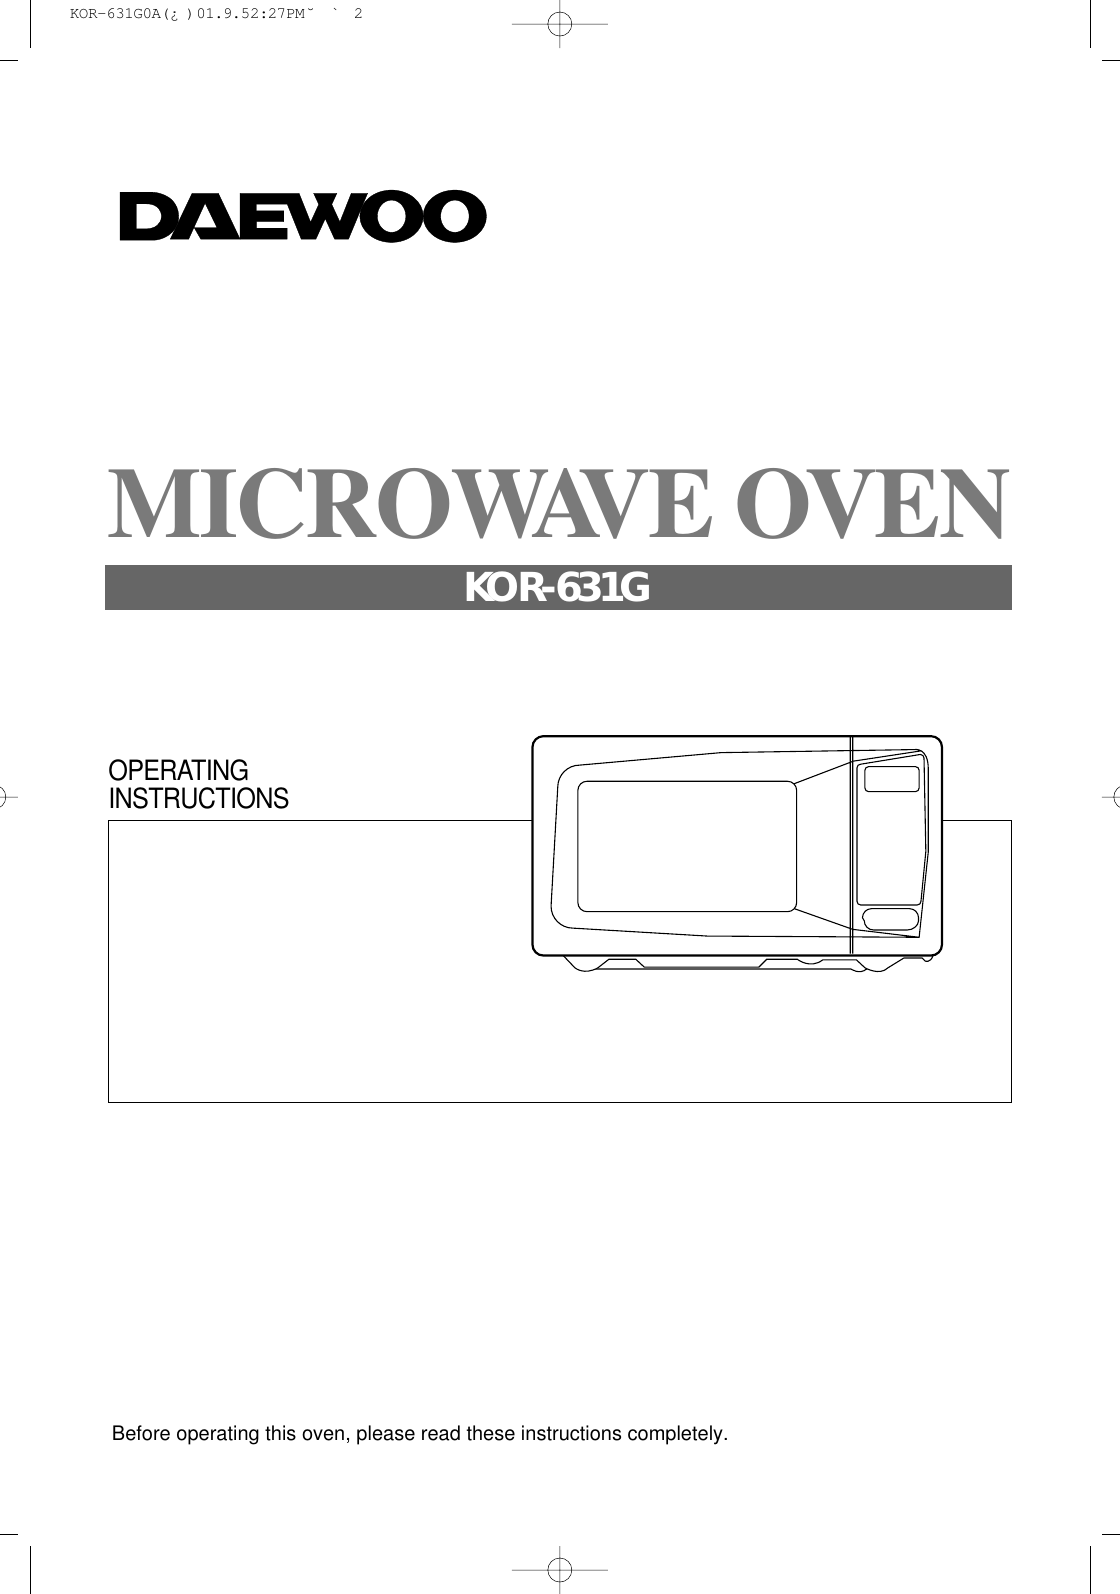 Before operating this oven, please read these instructions completely.OPERATINGINSTRUCTIONSMICROWAVE OVENKOR-631G KOR-631G0A(¿ )  01.9.5 2:27 PM  ˘`2